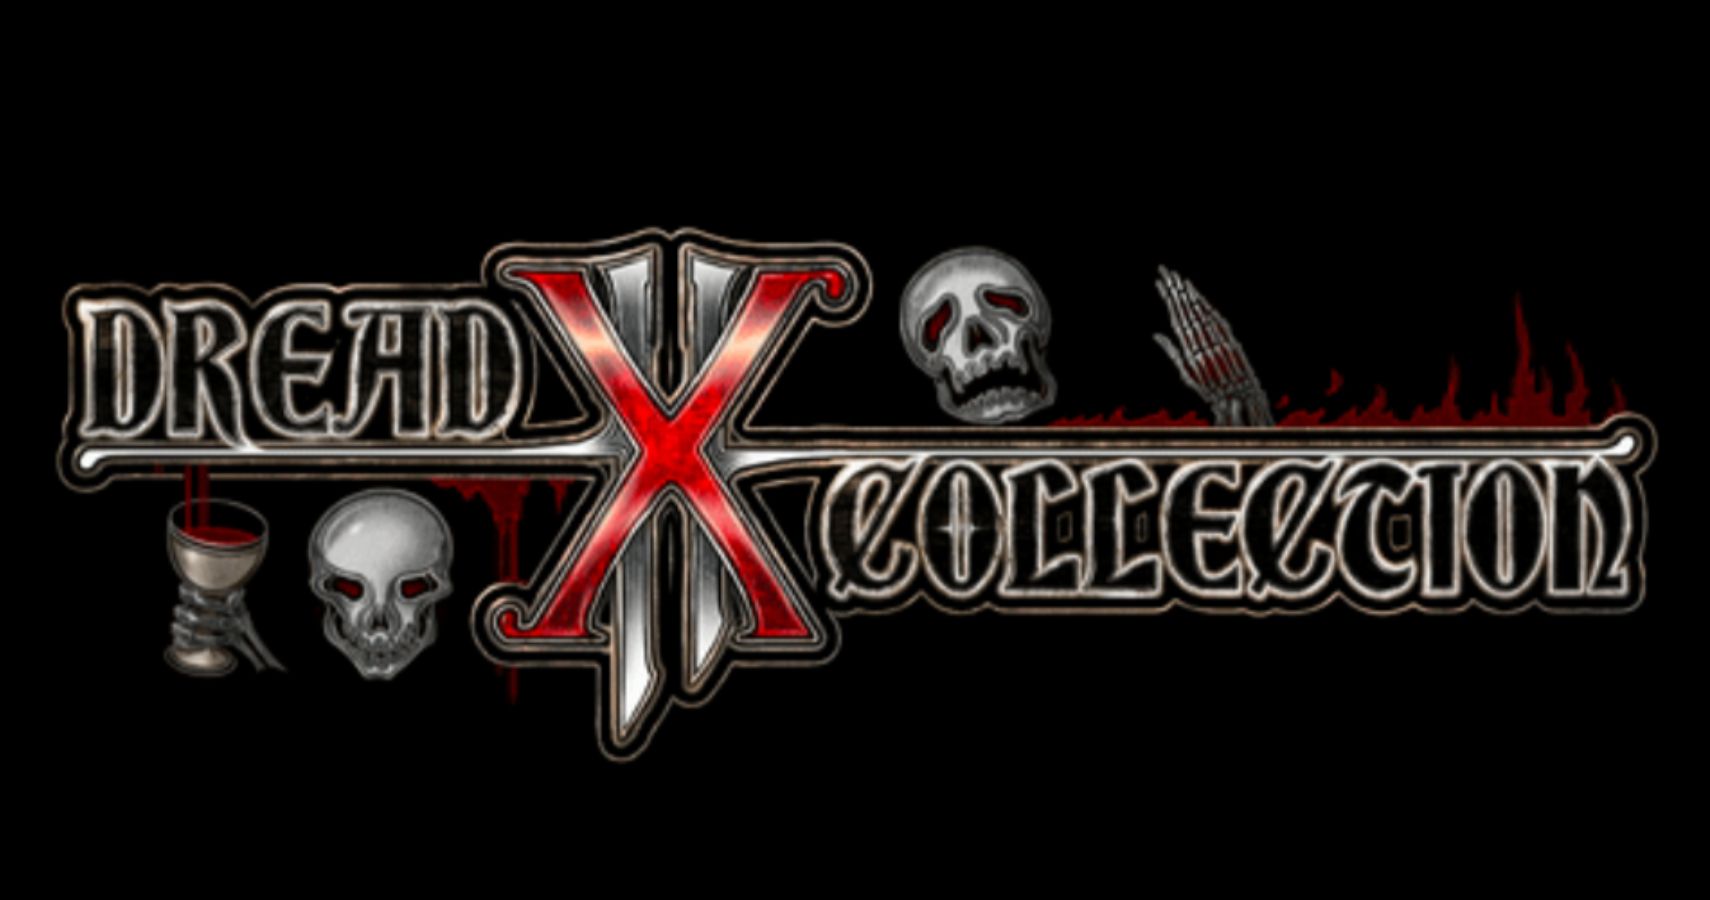 Best collection 2. Dread x collection 2. Dread x collection 5. Dread Hunger капеллан. Insane game collection.